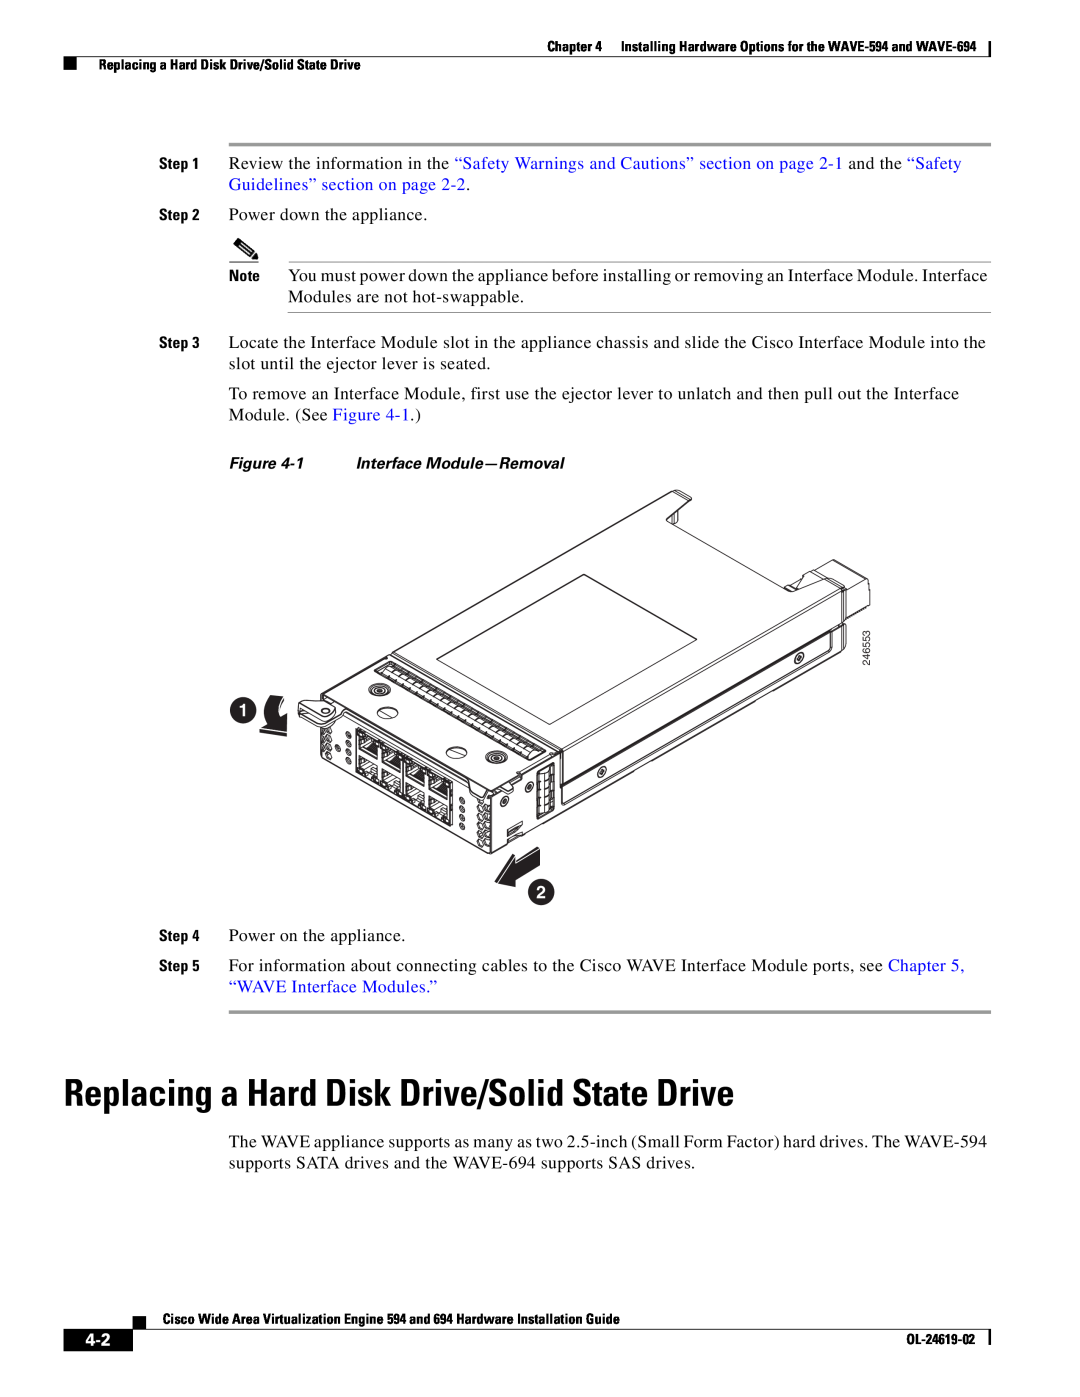 Cisco Systems WAVE594K9, 694 manual Replacing a Hard Disk Drive/Solid State Drive 